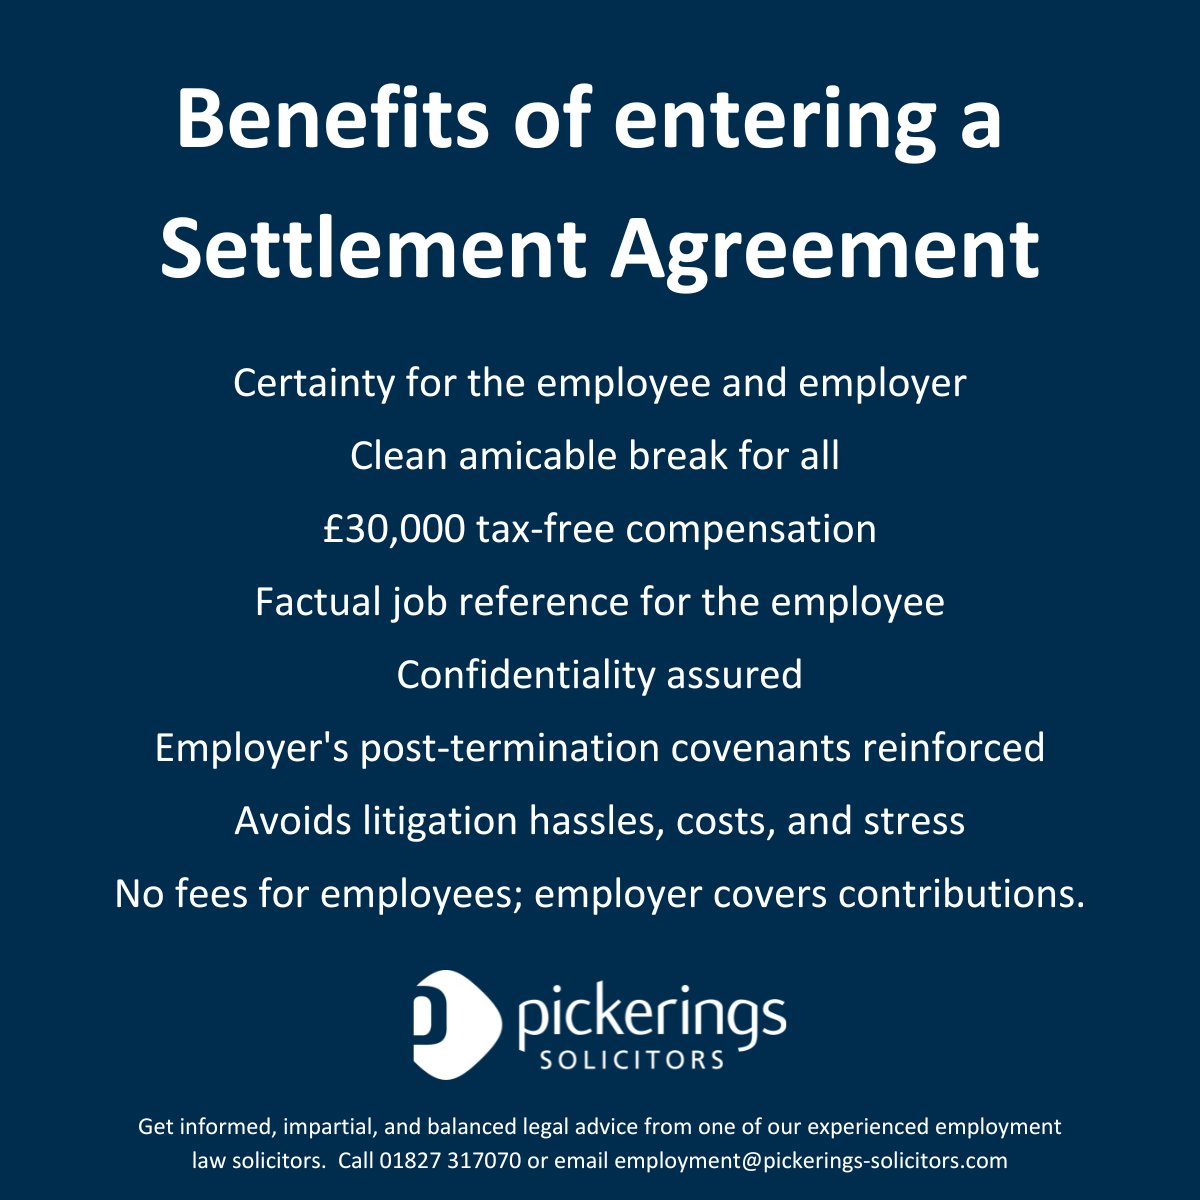 Need help with a Settlement Agreement?

We offer a same day certification.

🌐 rb.gy/8nljs3
📞 01827 317070
📧employment@pickerings-solicitors.com

#settlementagreements #LegalGuidance #HR #hrchallenges #legalsupport